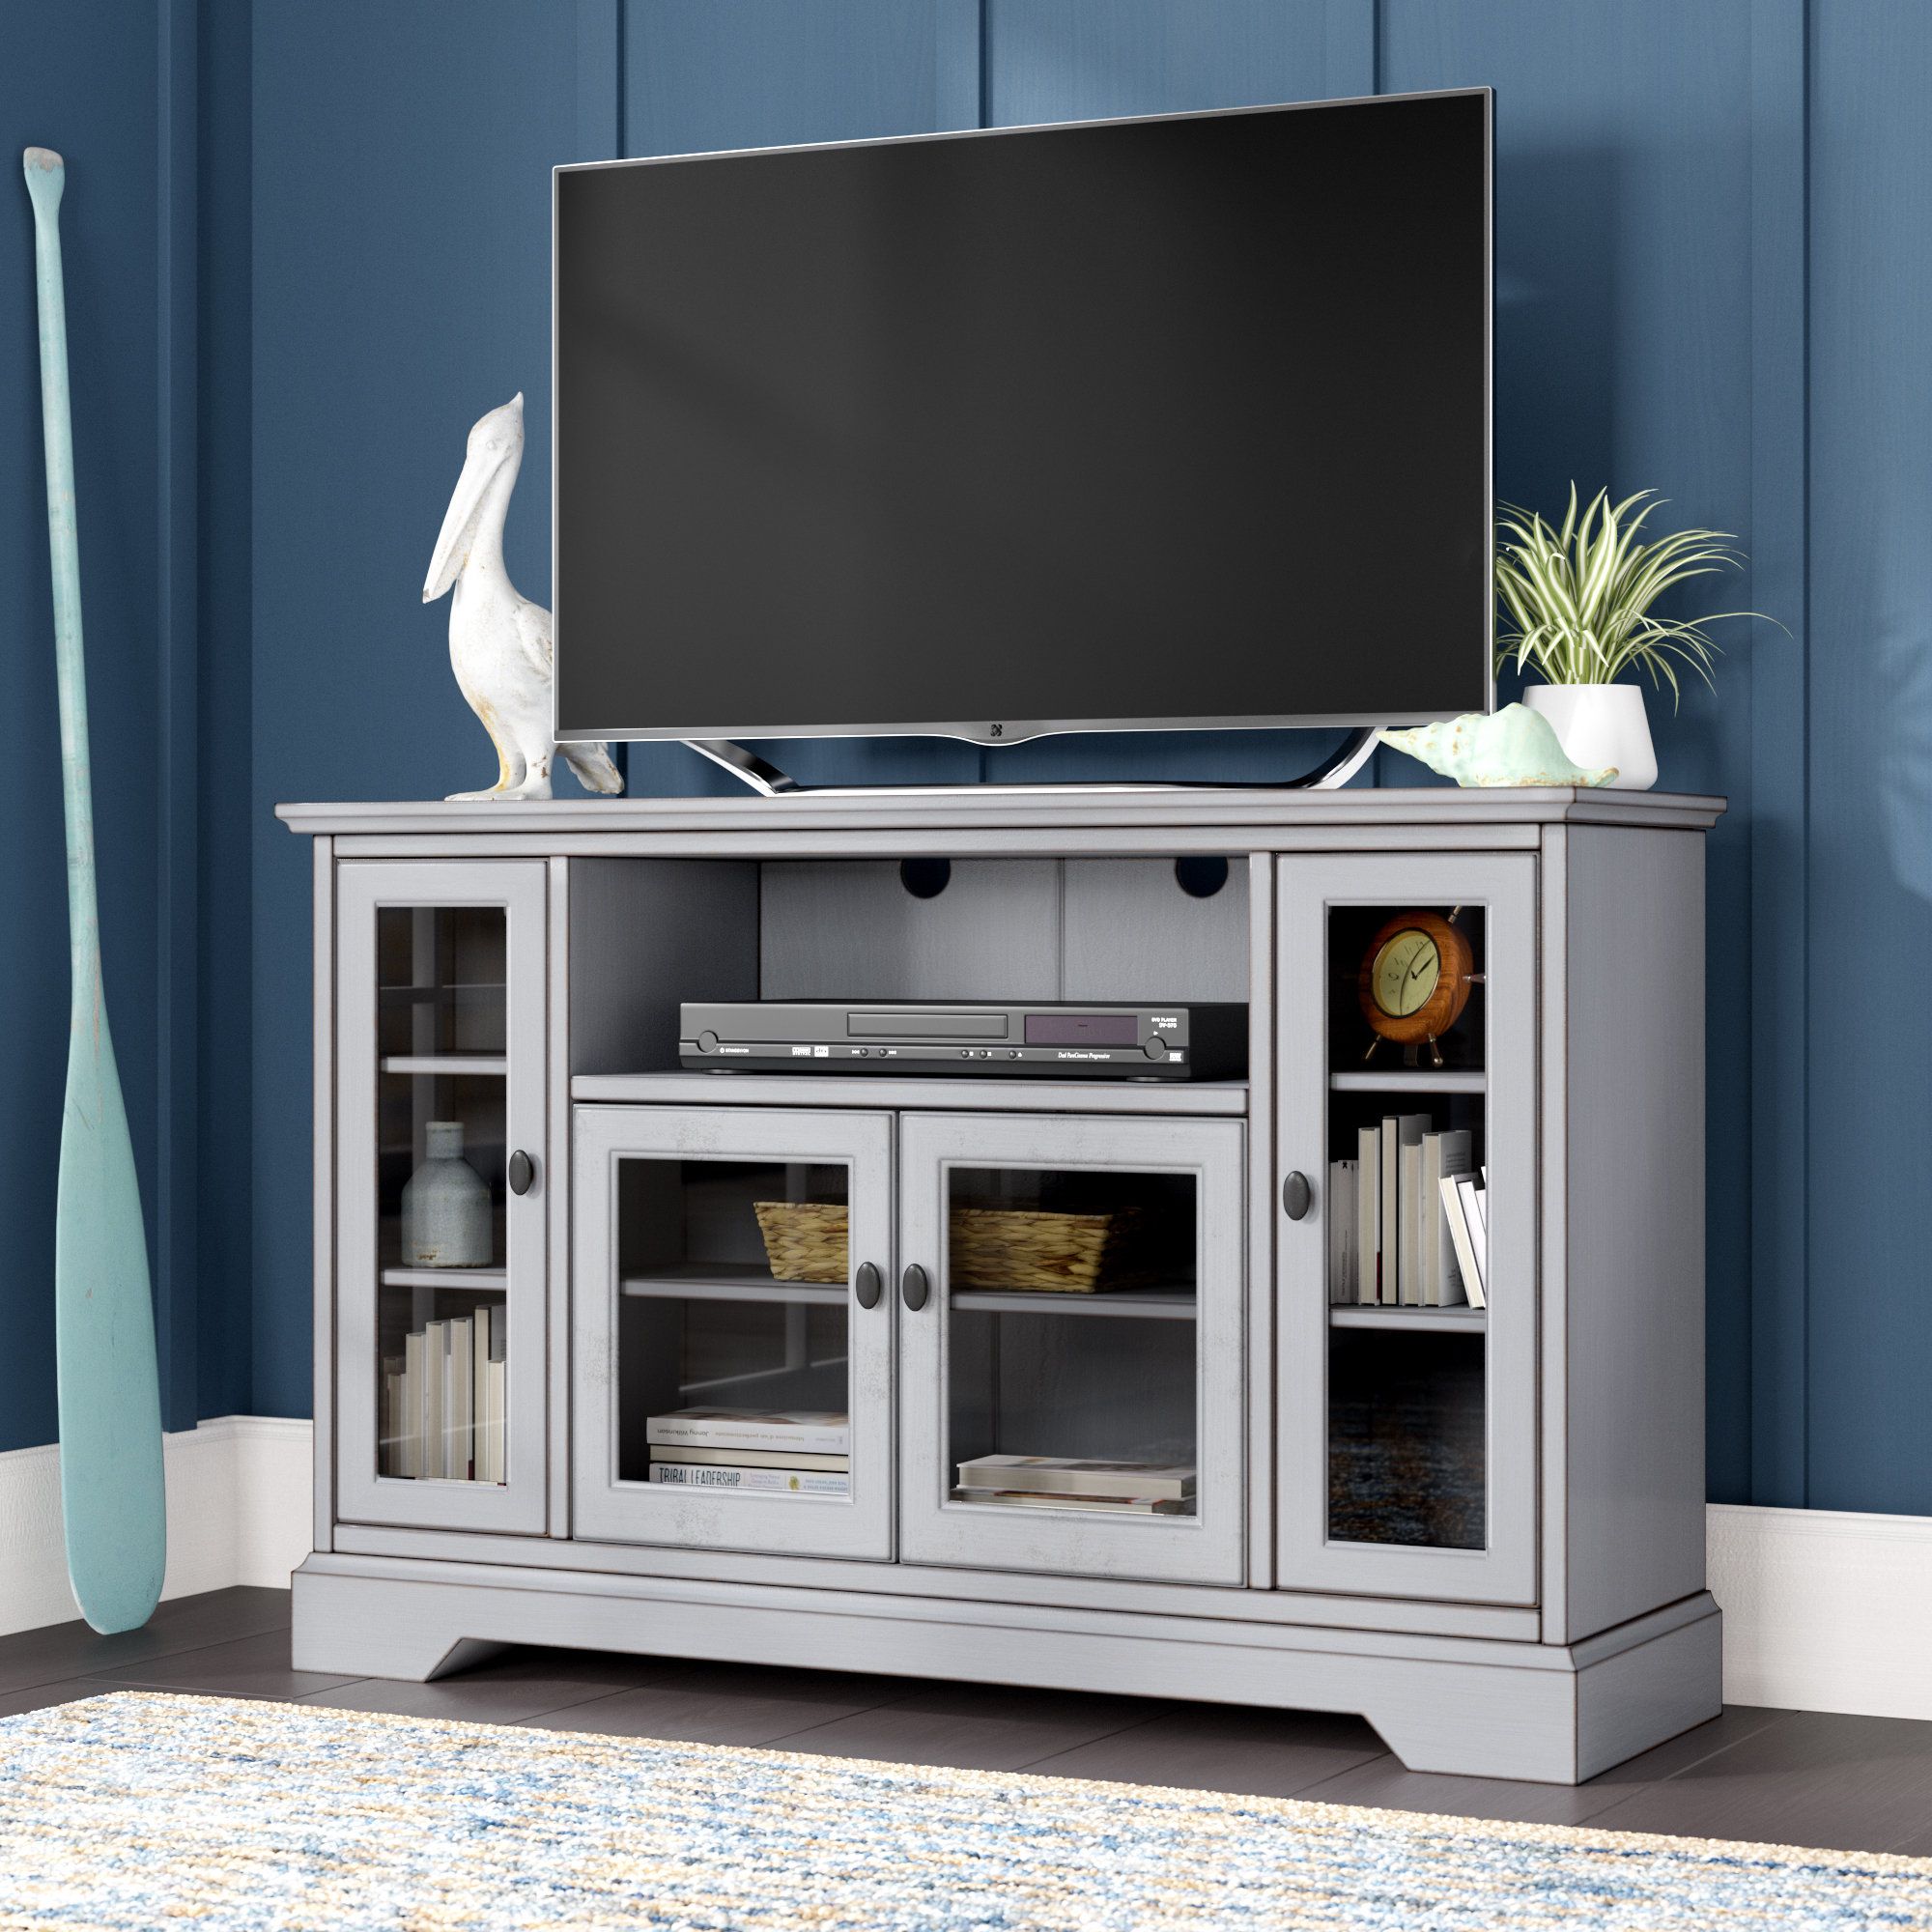 Beachcrest Home Josie Tv Stand For Tvs Up To 55" & Reviews | Wayfair Throughout Walton Grey 60 Inch Tv Stands (View 15 of 30)